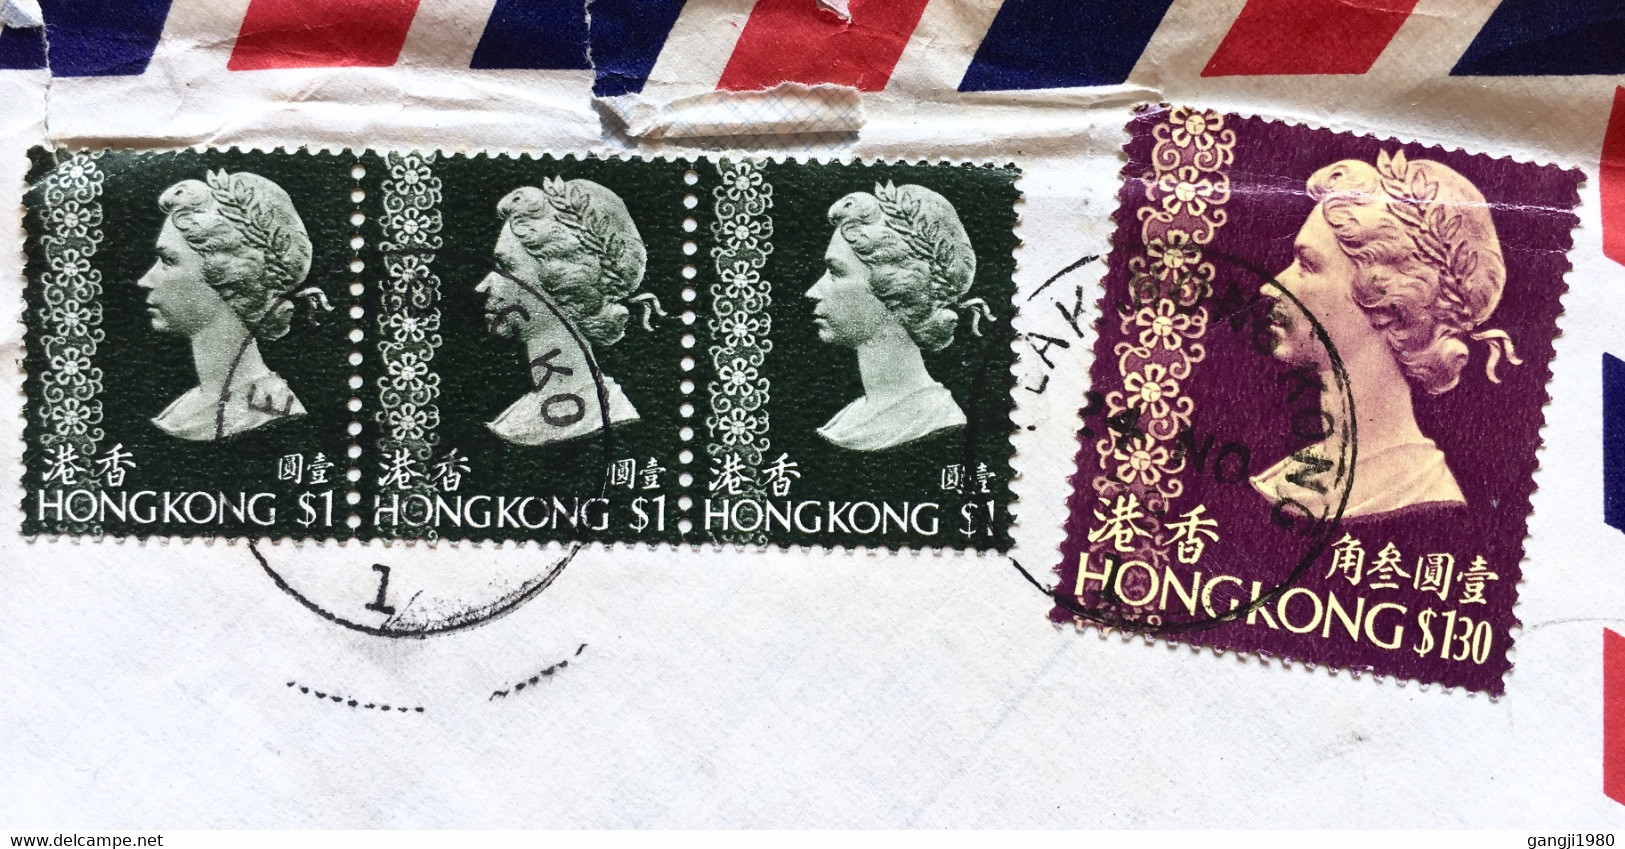 HONG KONG TO ENGLAND 1971, USED COVER, QUEEN 1$ 3 STAMPS, 1.30$ ONE STAMP, VIGNETTE EXPRESS LABEL, LAKE HONG KONG CANCEL - Briefe U. Dokumente